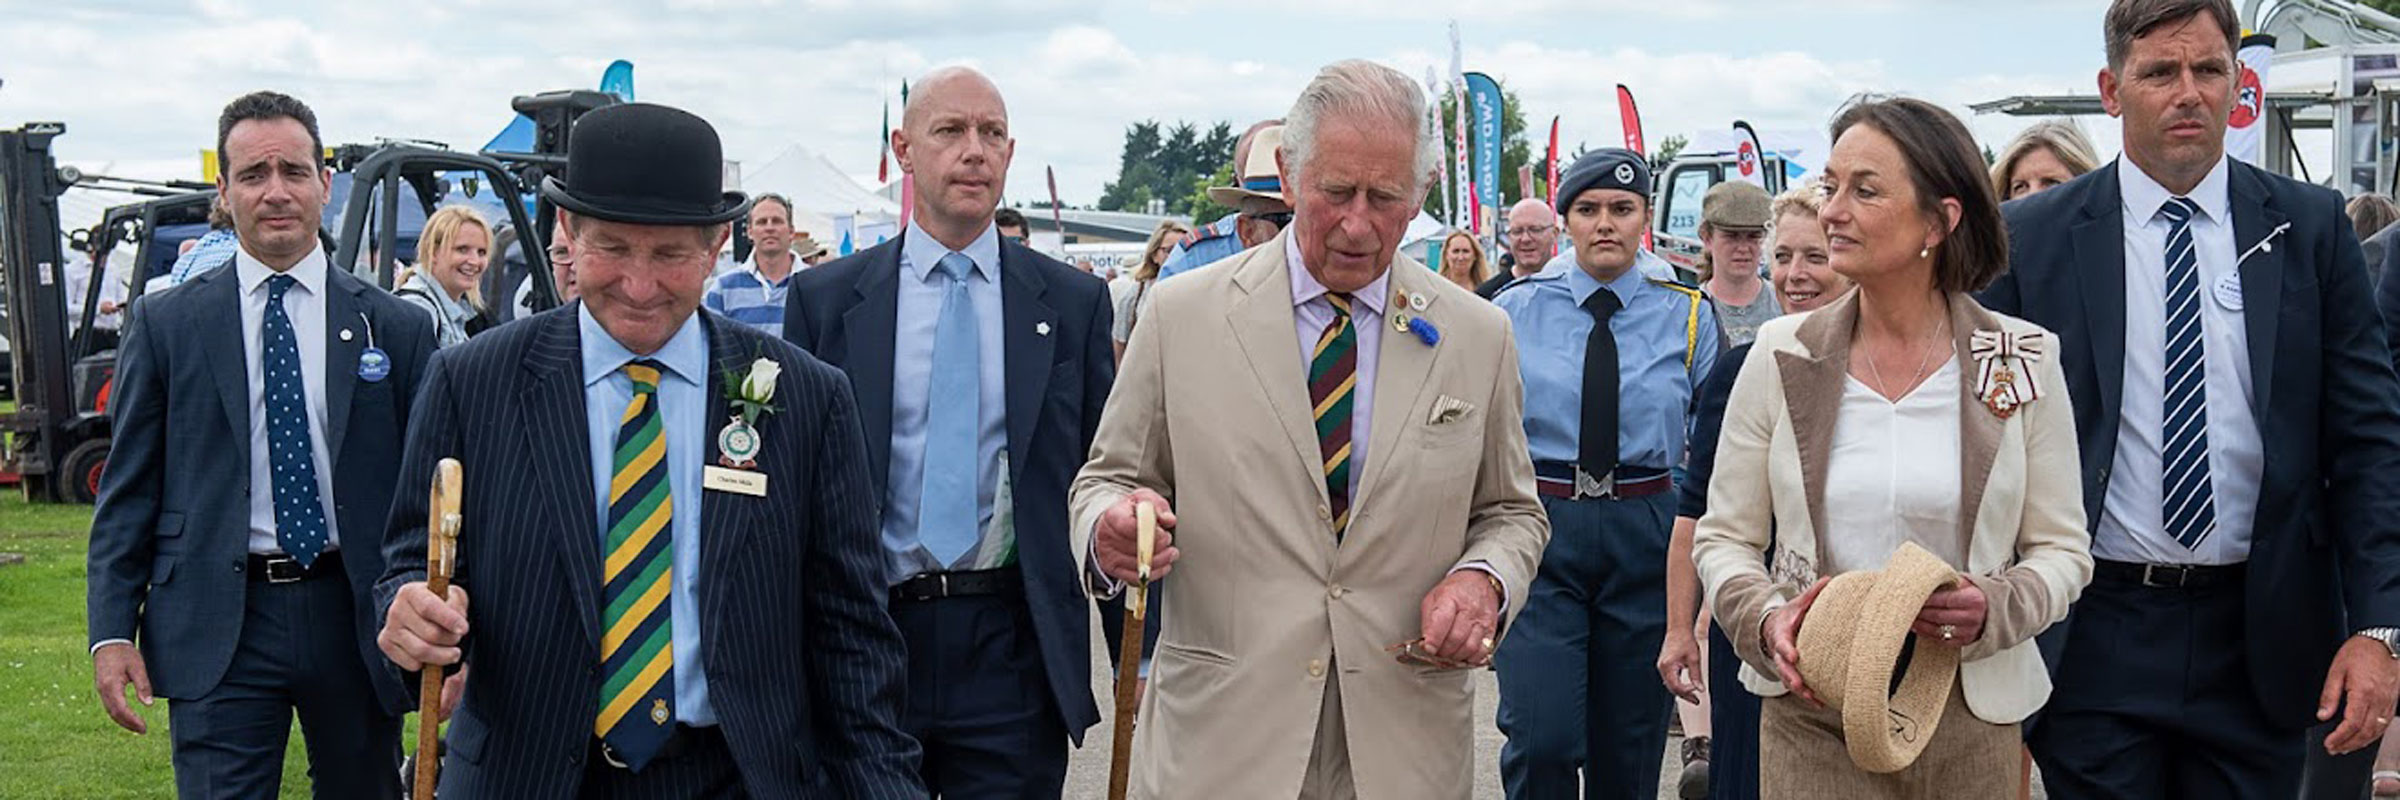 His Majesty The King visits the Great Yorkshire Show